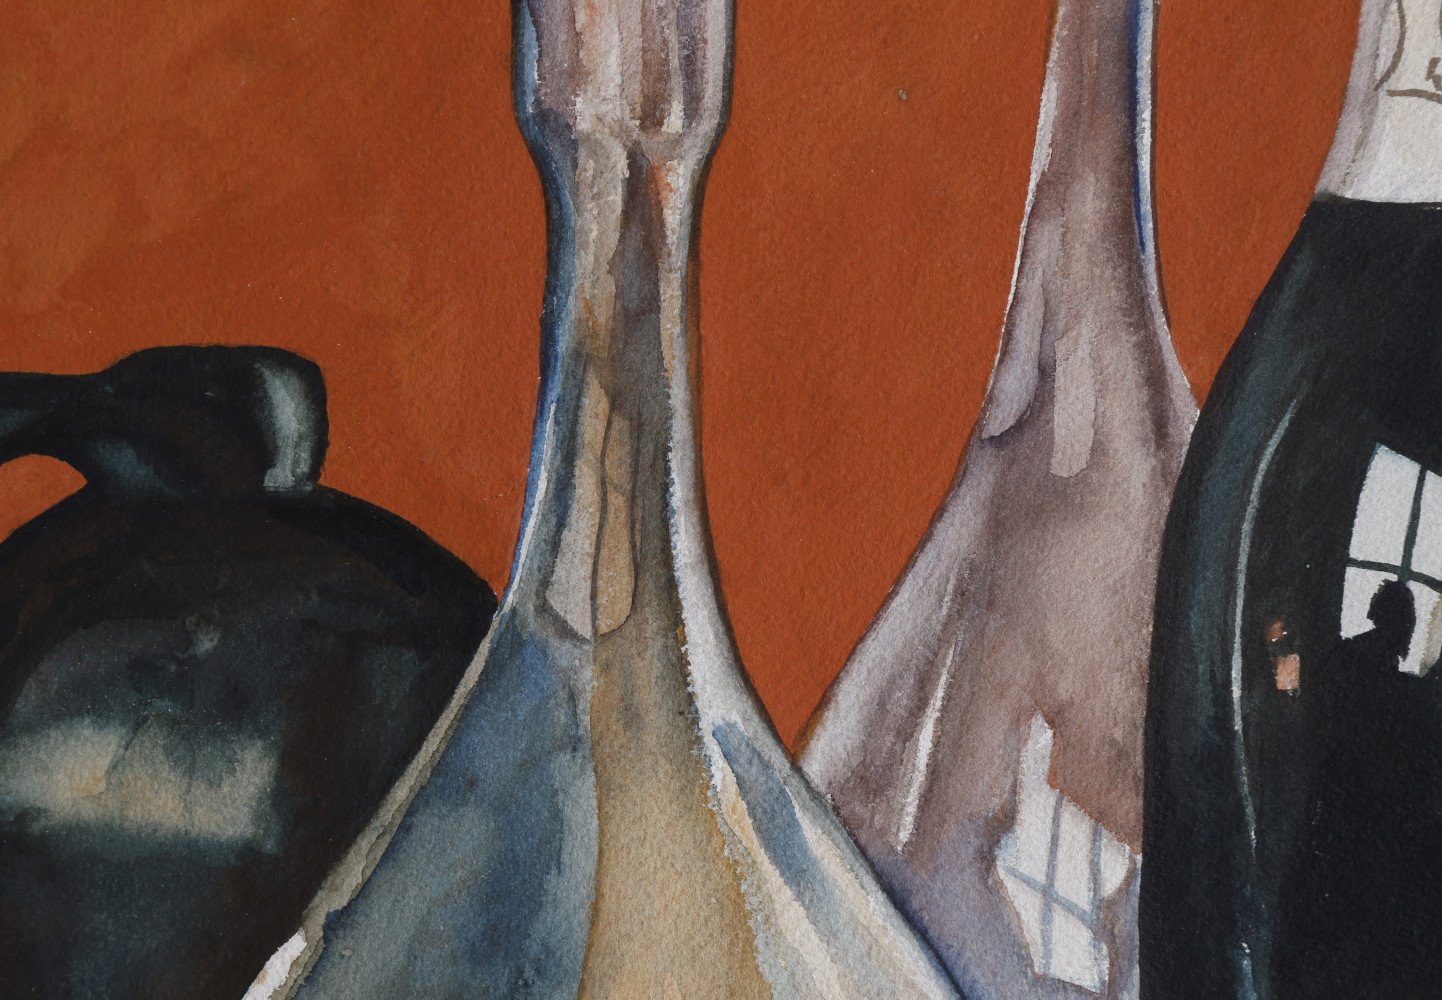 Still Life Watercolor on Paper Painting: 